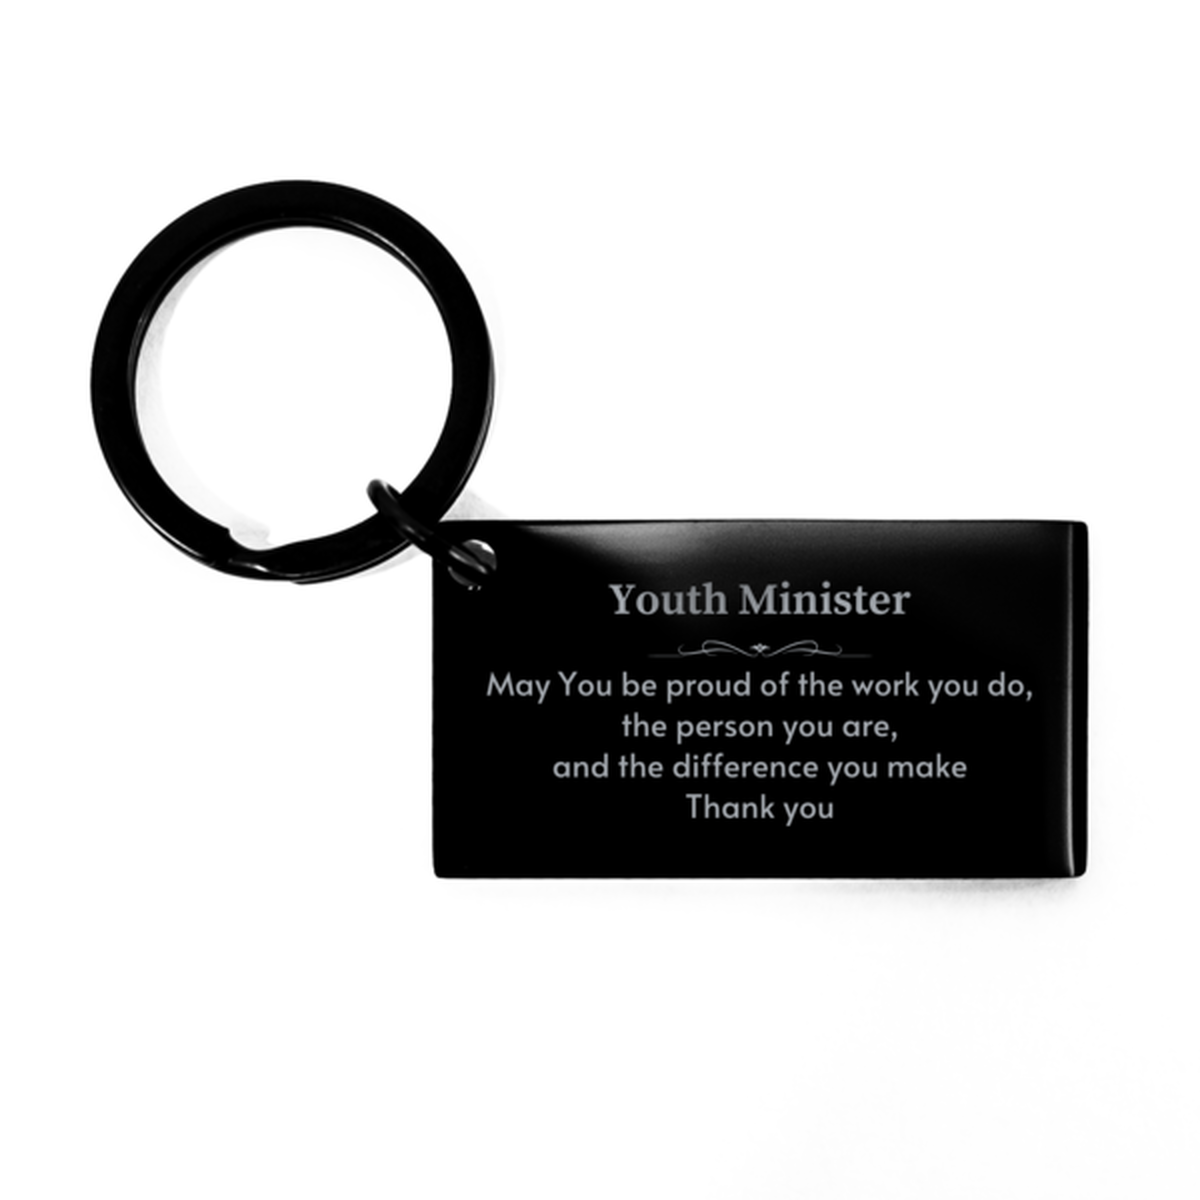 Heartwarming Keychain Retirement Coworkers Gifts for Youth Minister, Bailiff May You be proud of the work you do, the person you are Gifts for Boss Men Women Friends